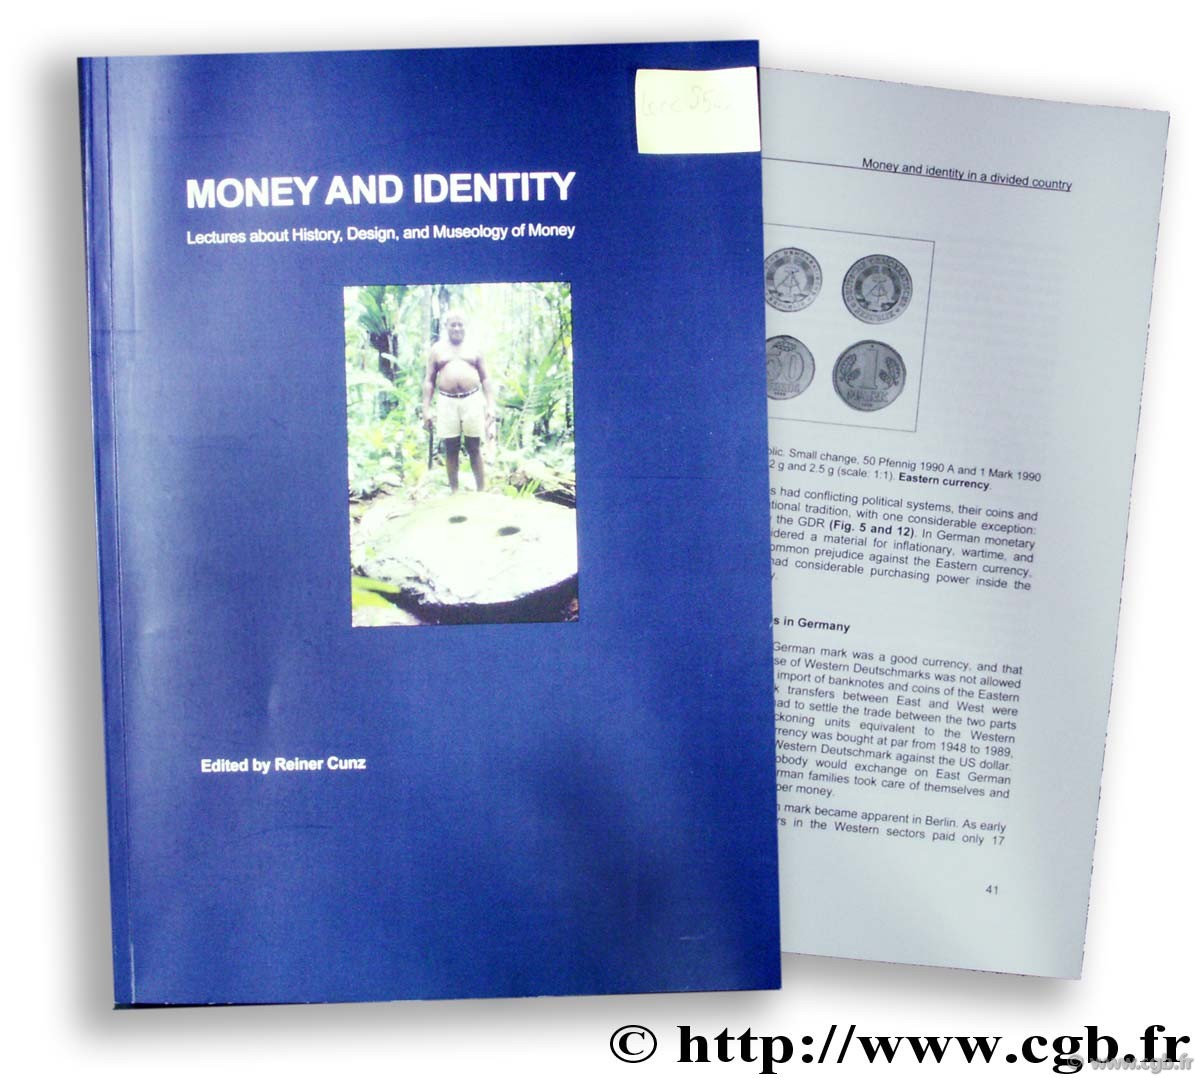 Money and Identity. Lectures about History, Design and Museology of Money 